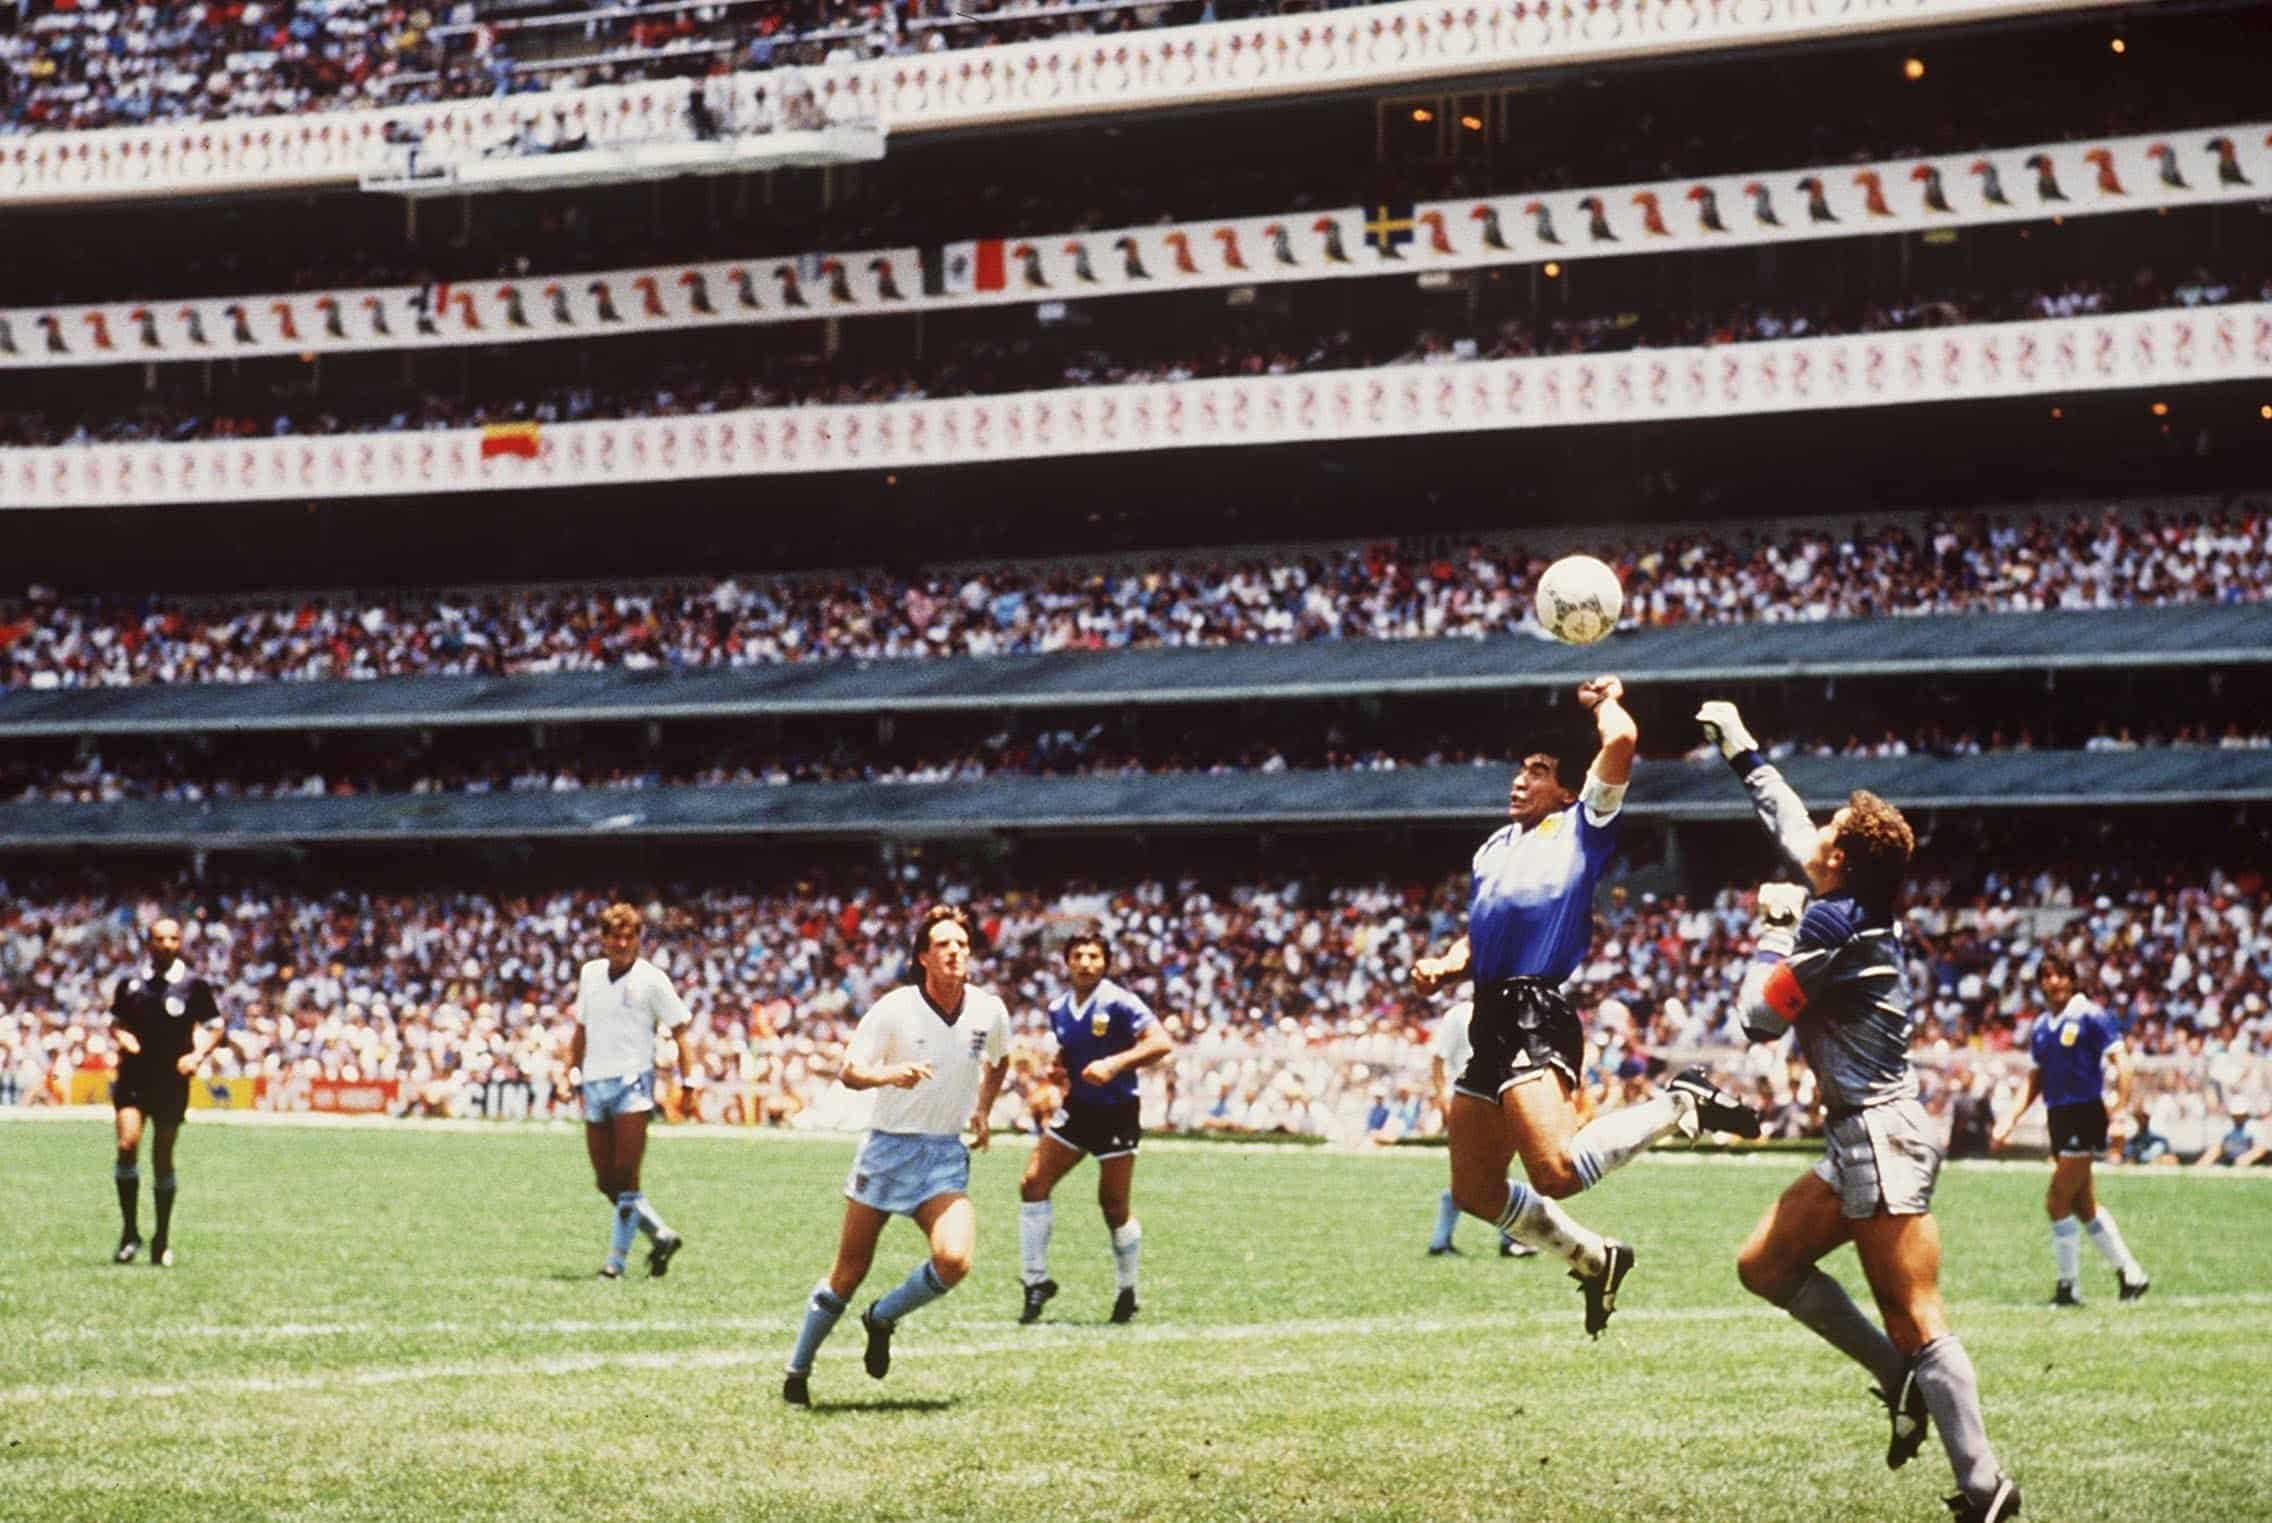 WATCH. Diego Maradona: 5 of his greatest goals, including 'Hand of God' controversy